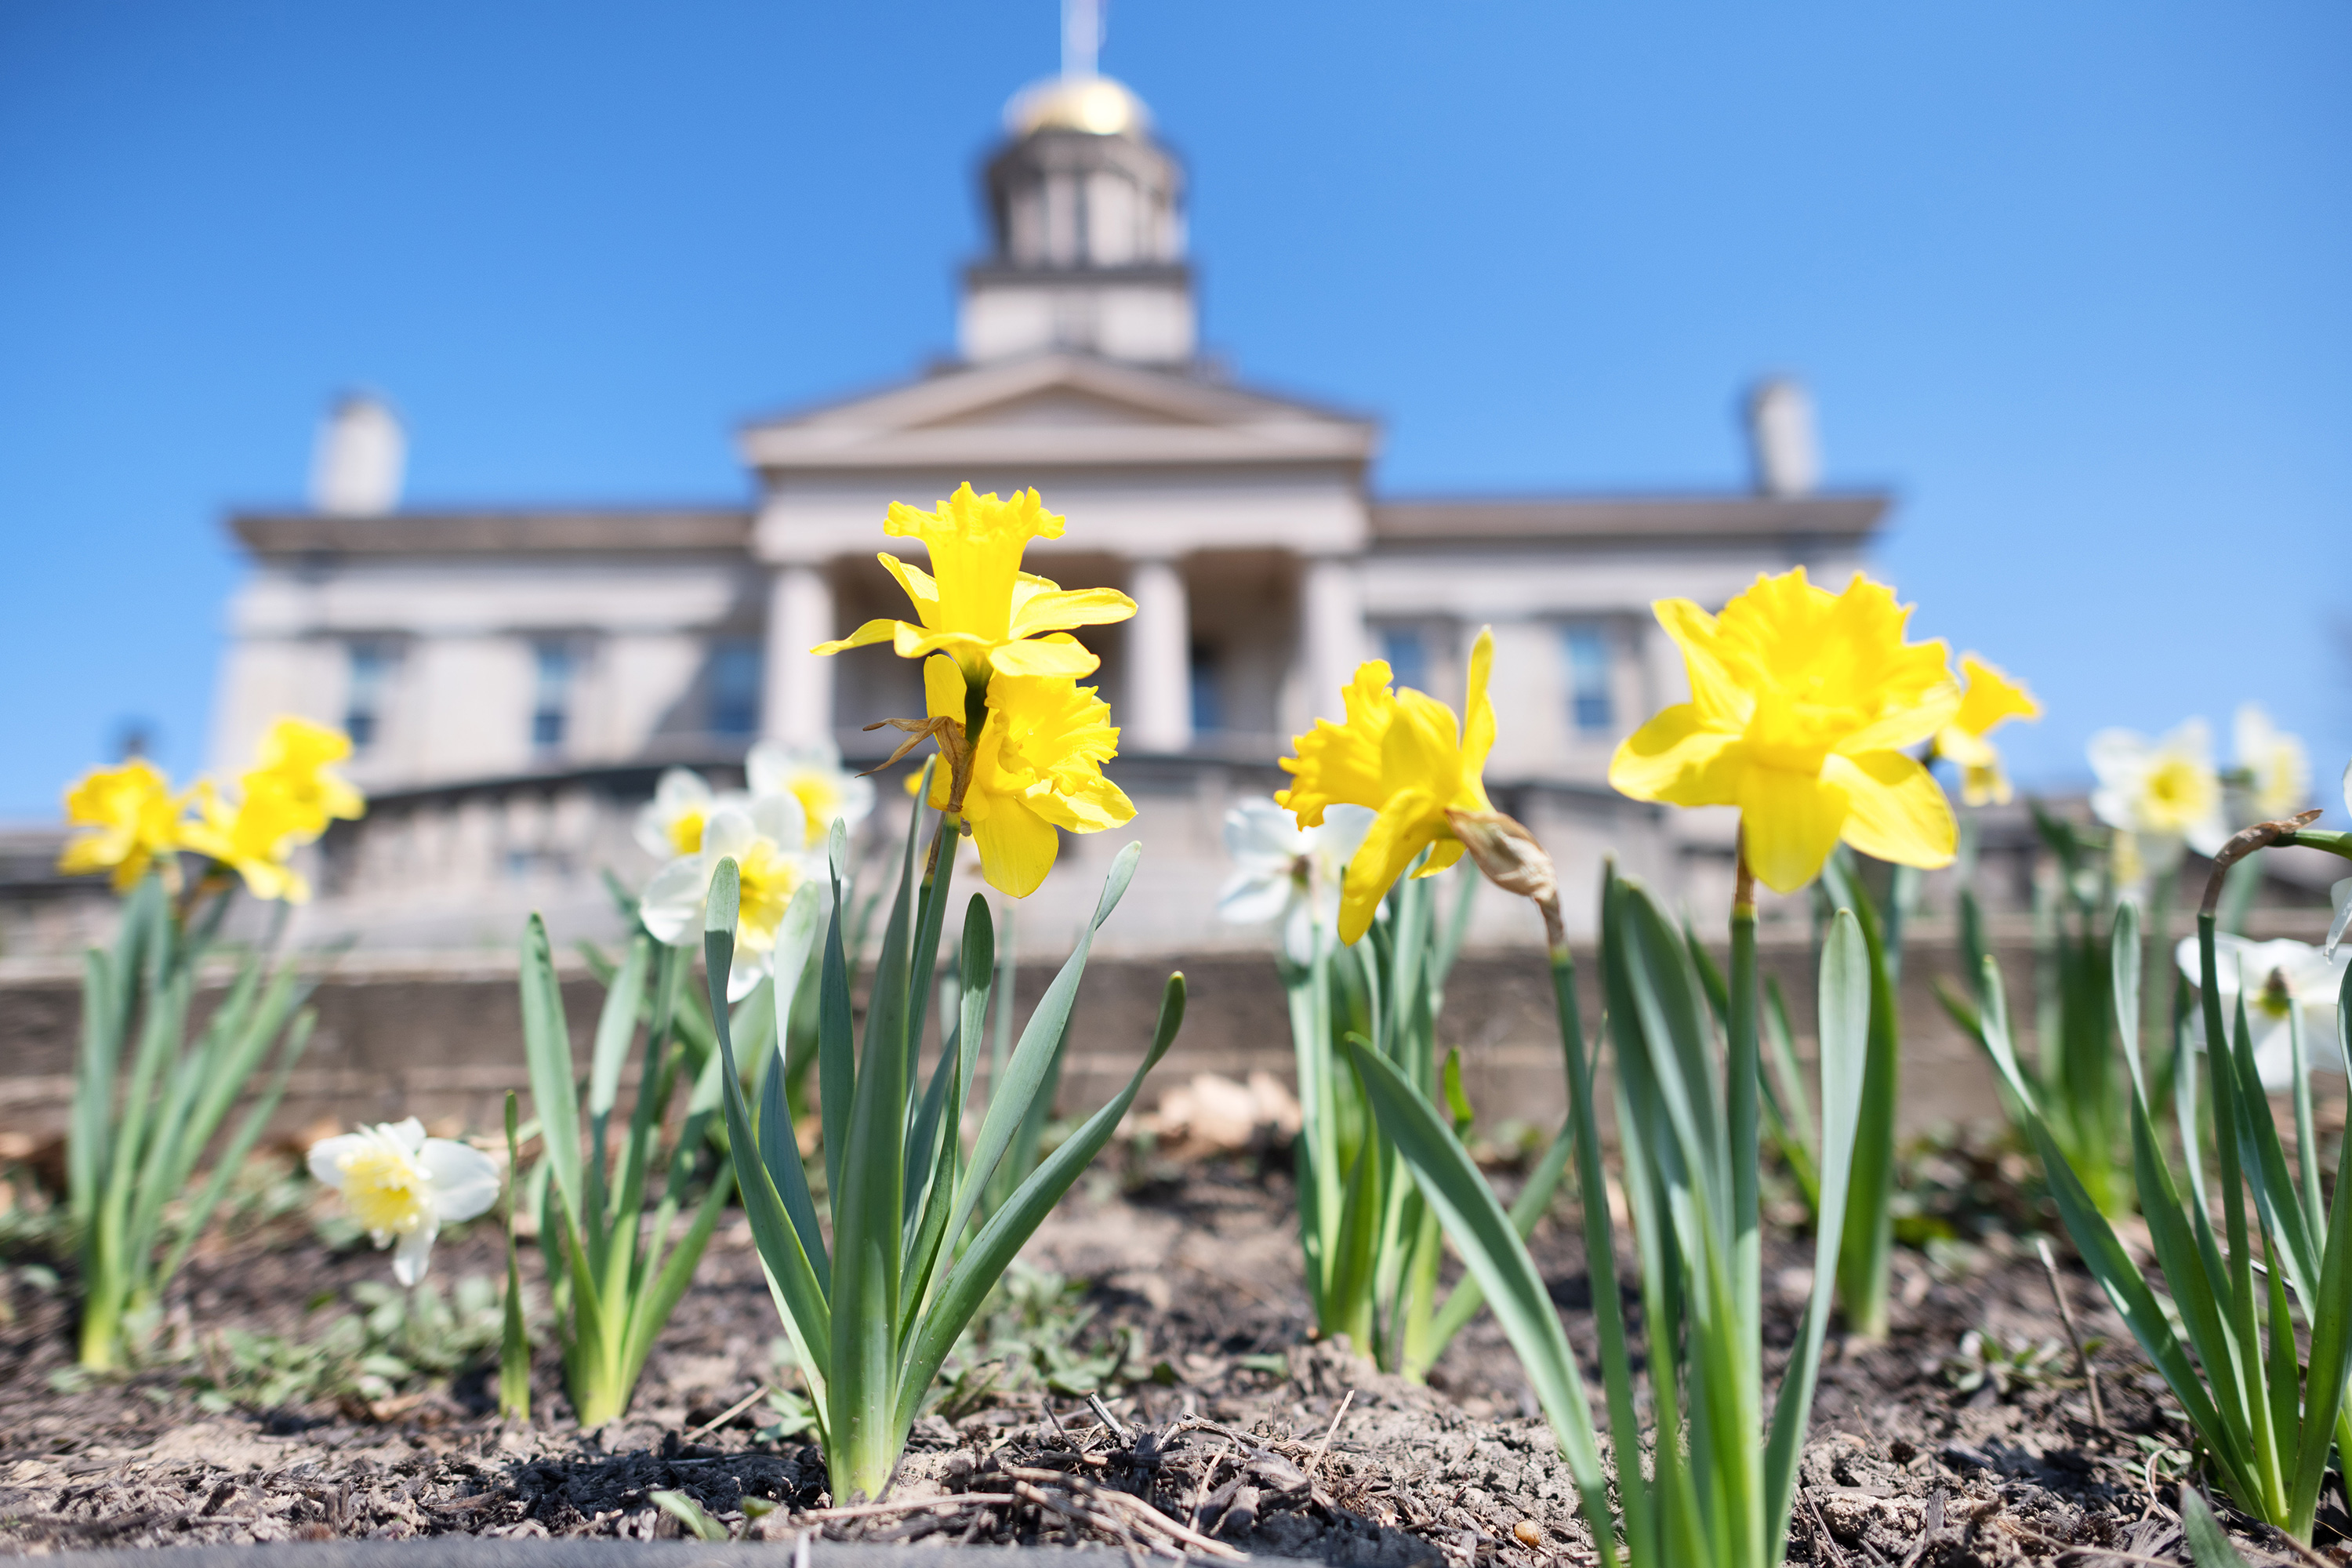 Daffodils blooming in front of the Old Capitol